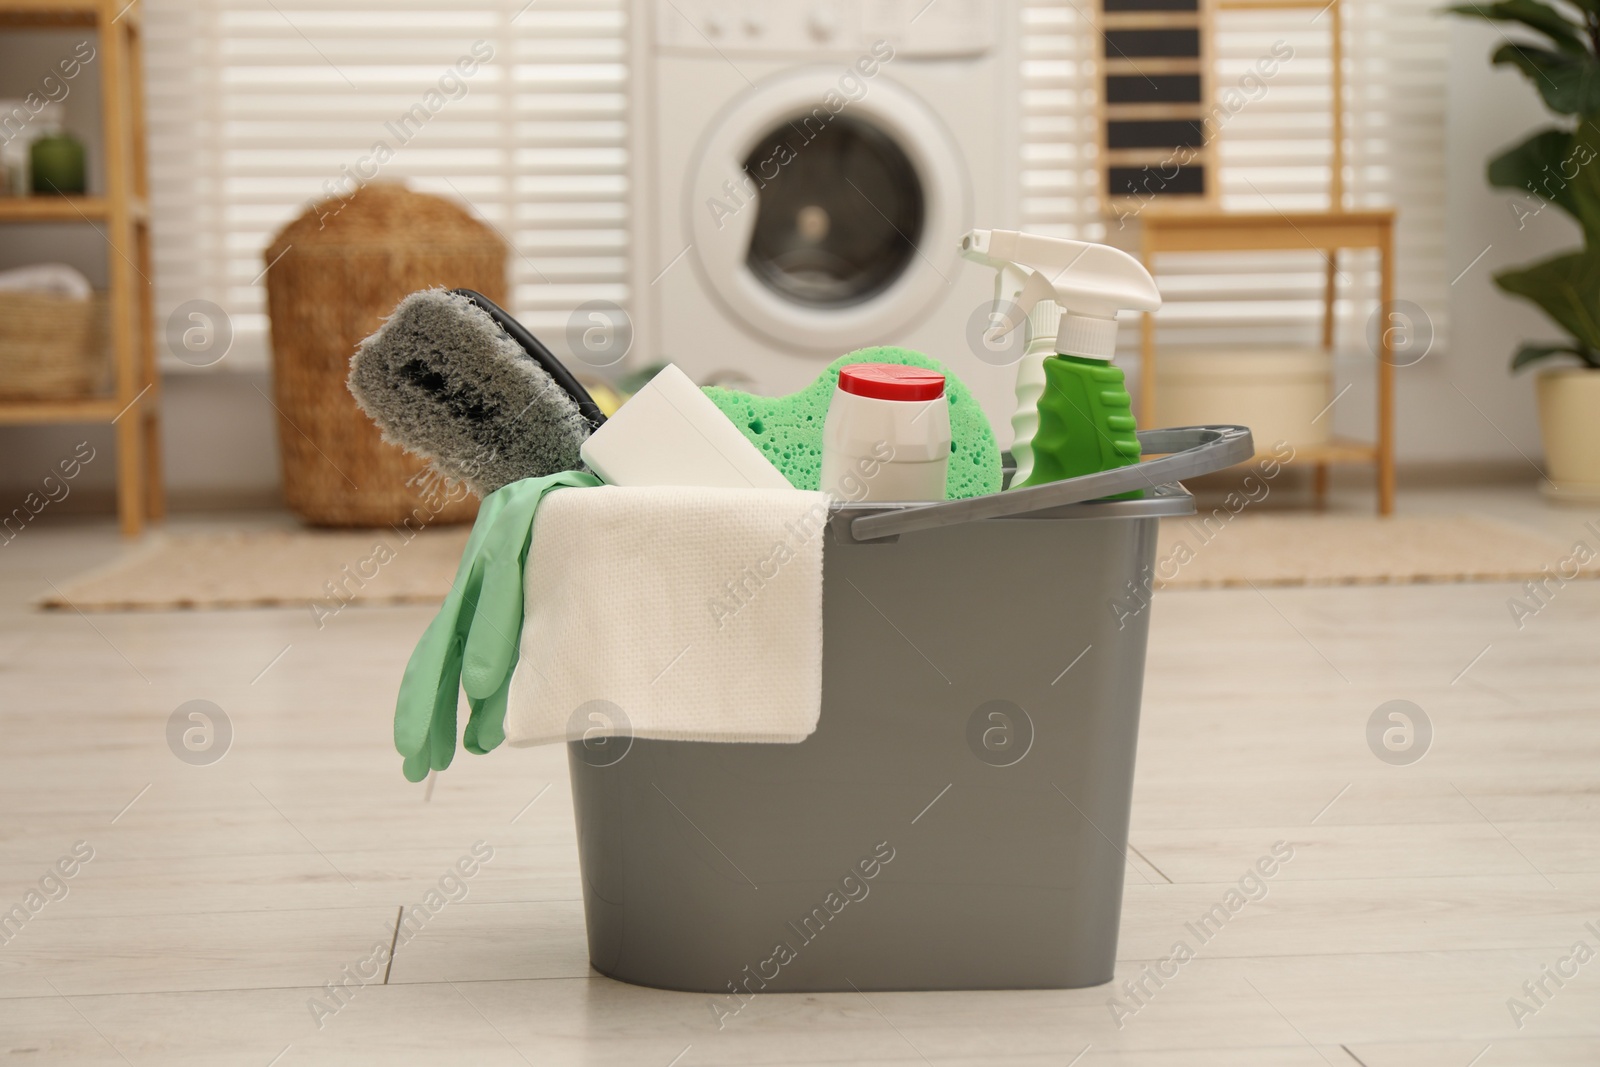 Photo of Different cleaning products in bucket on floor indoors